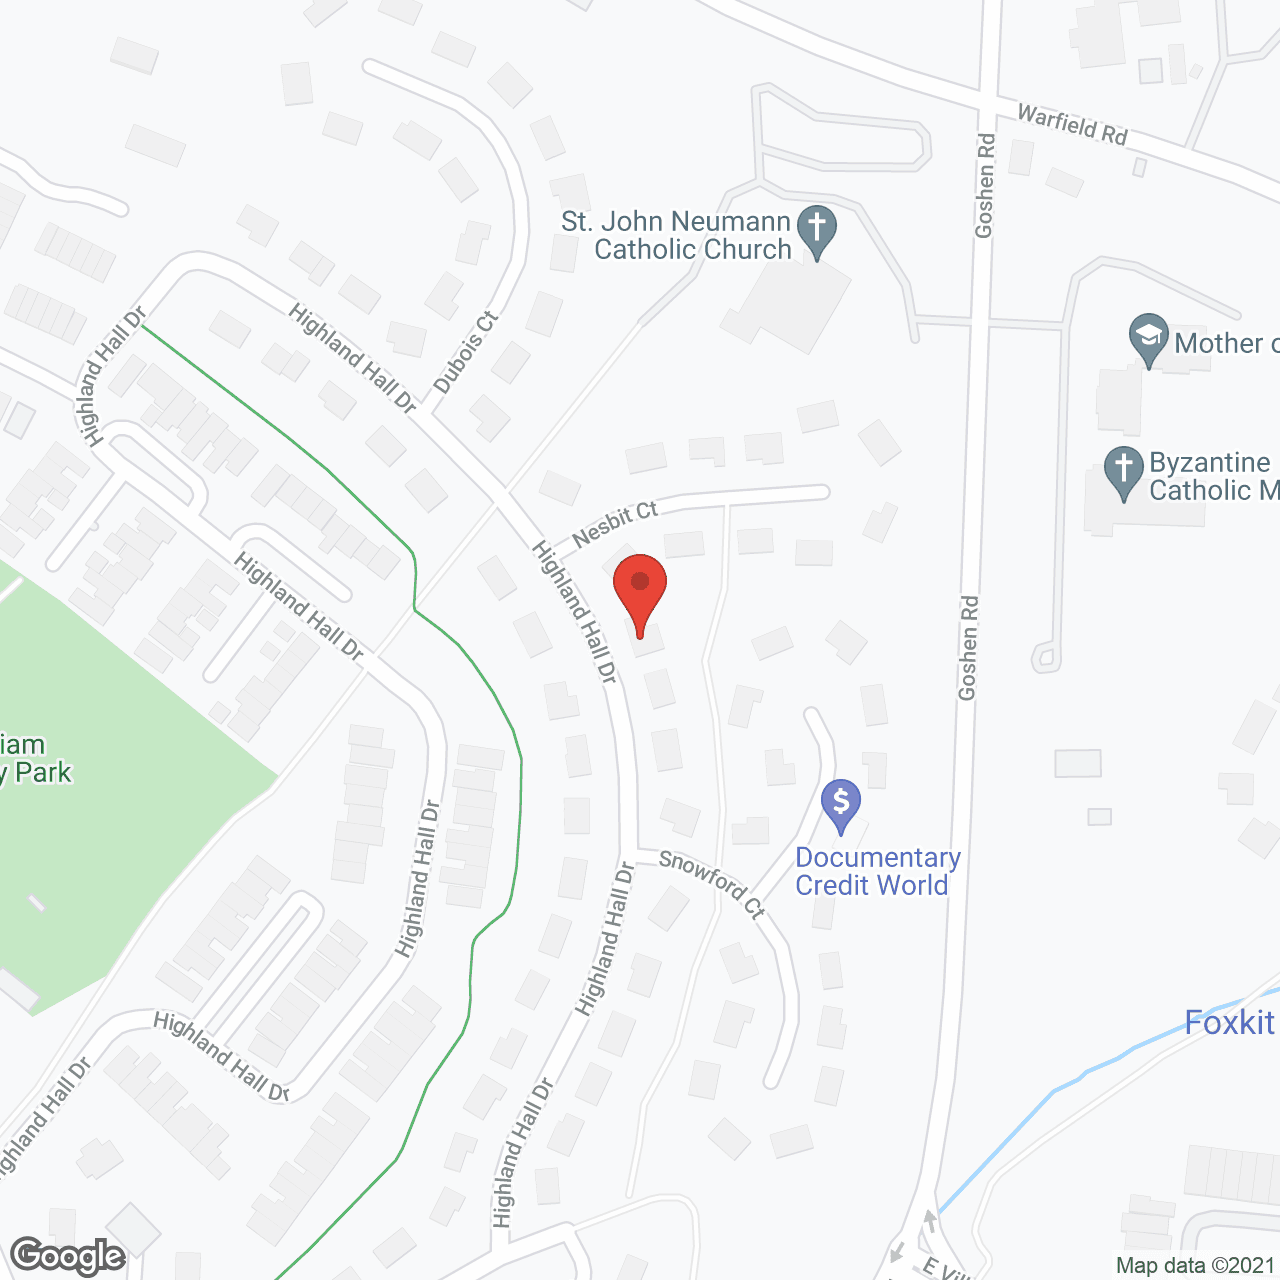 Quality Comfort Care Home in google map